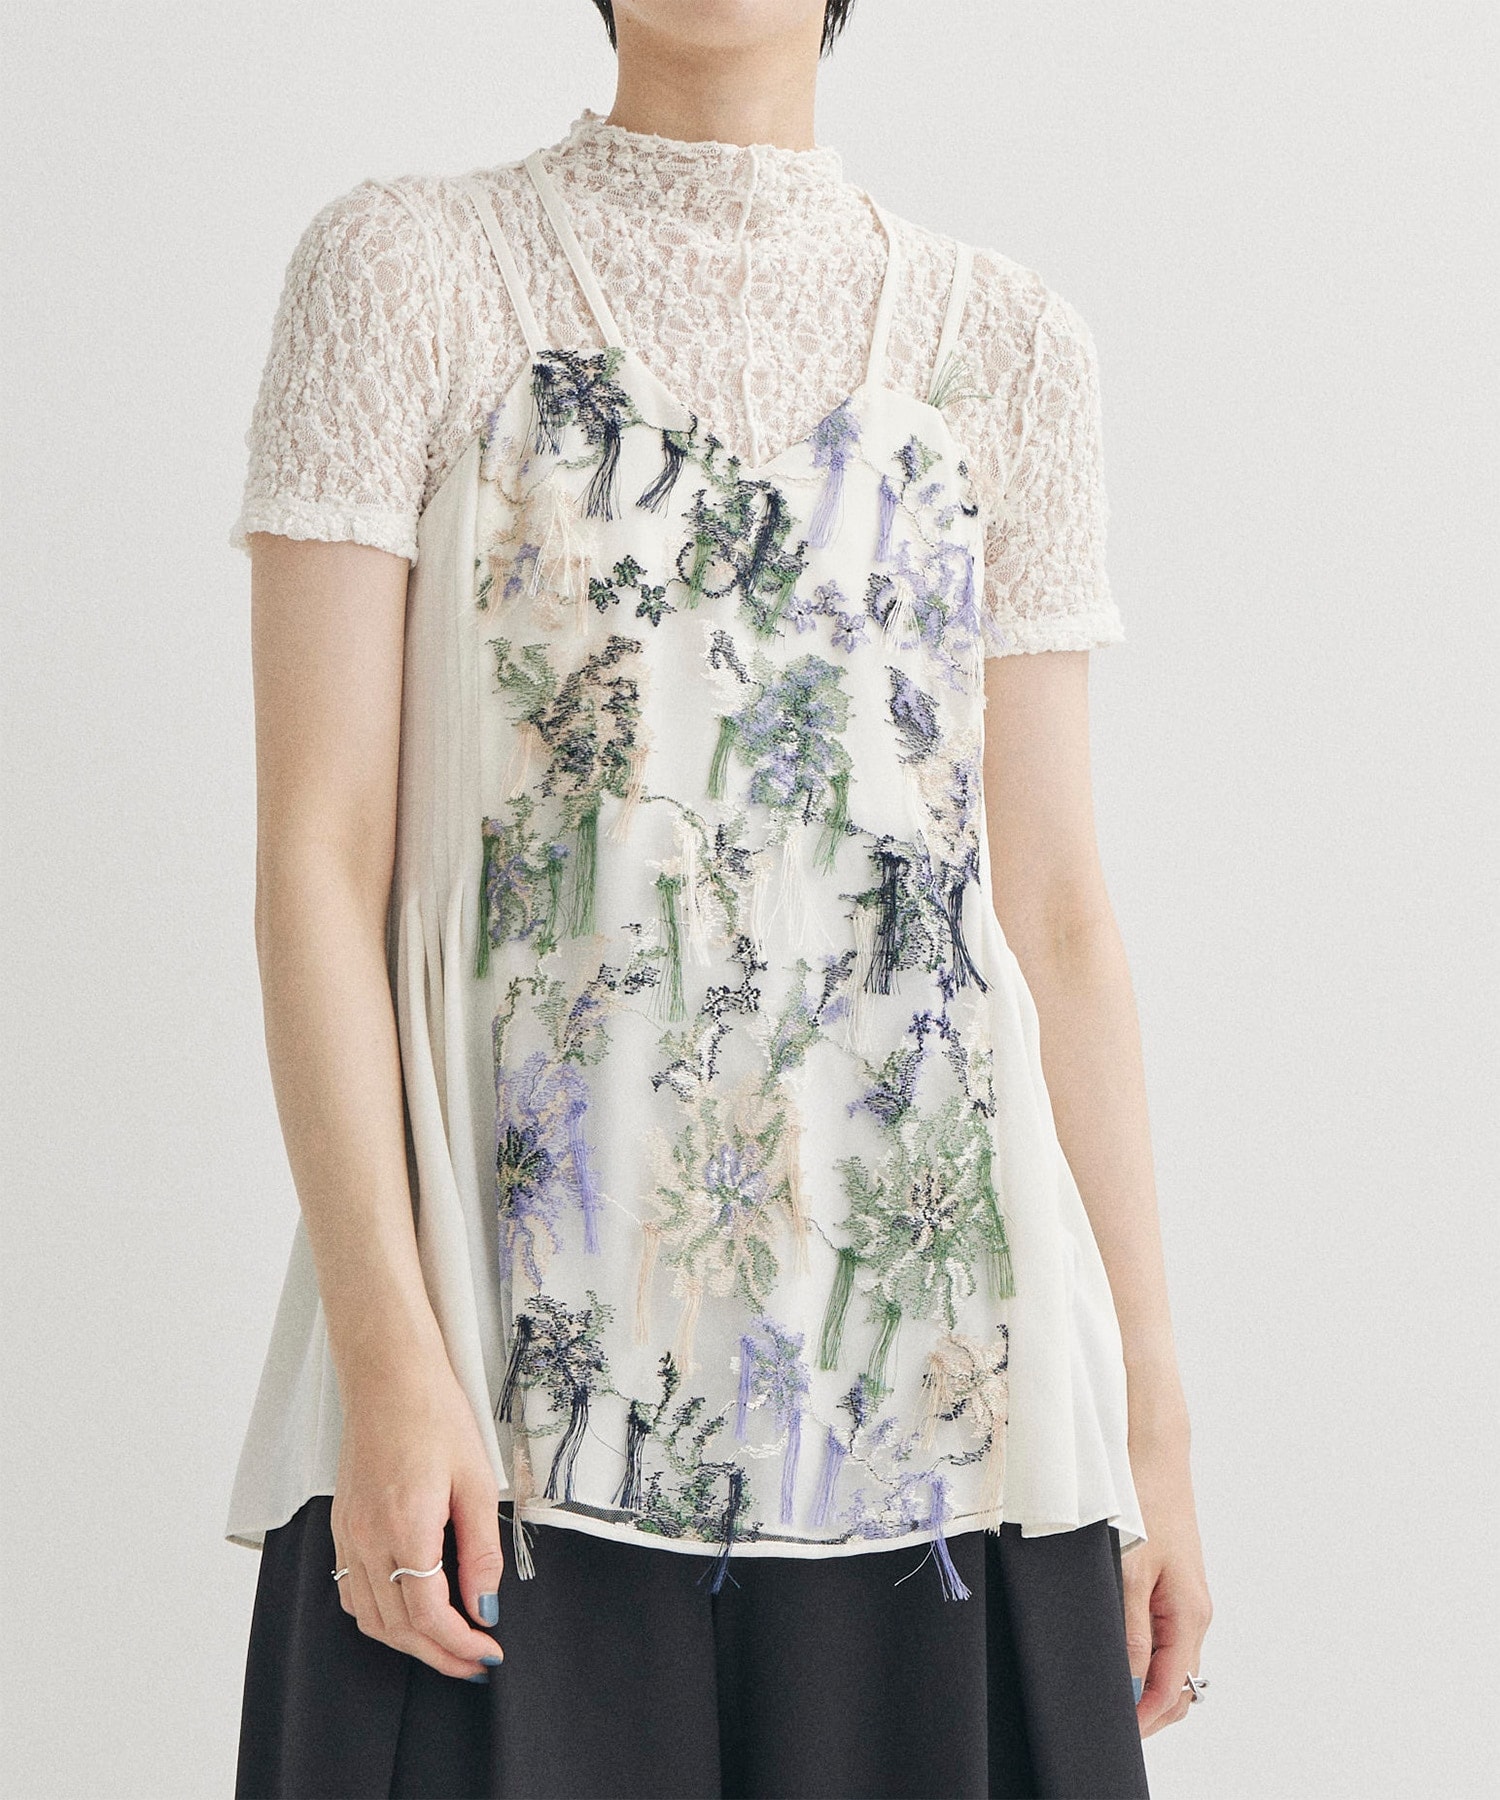 Floating flower lace camisole top